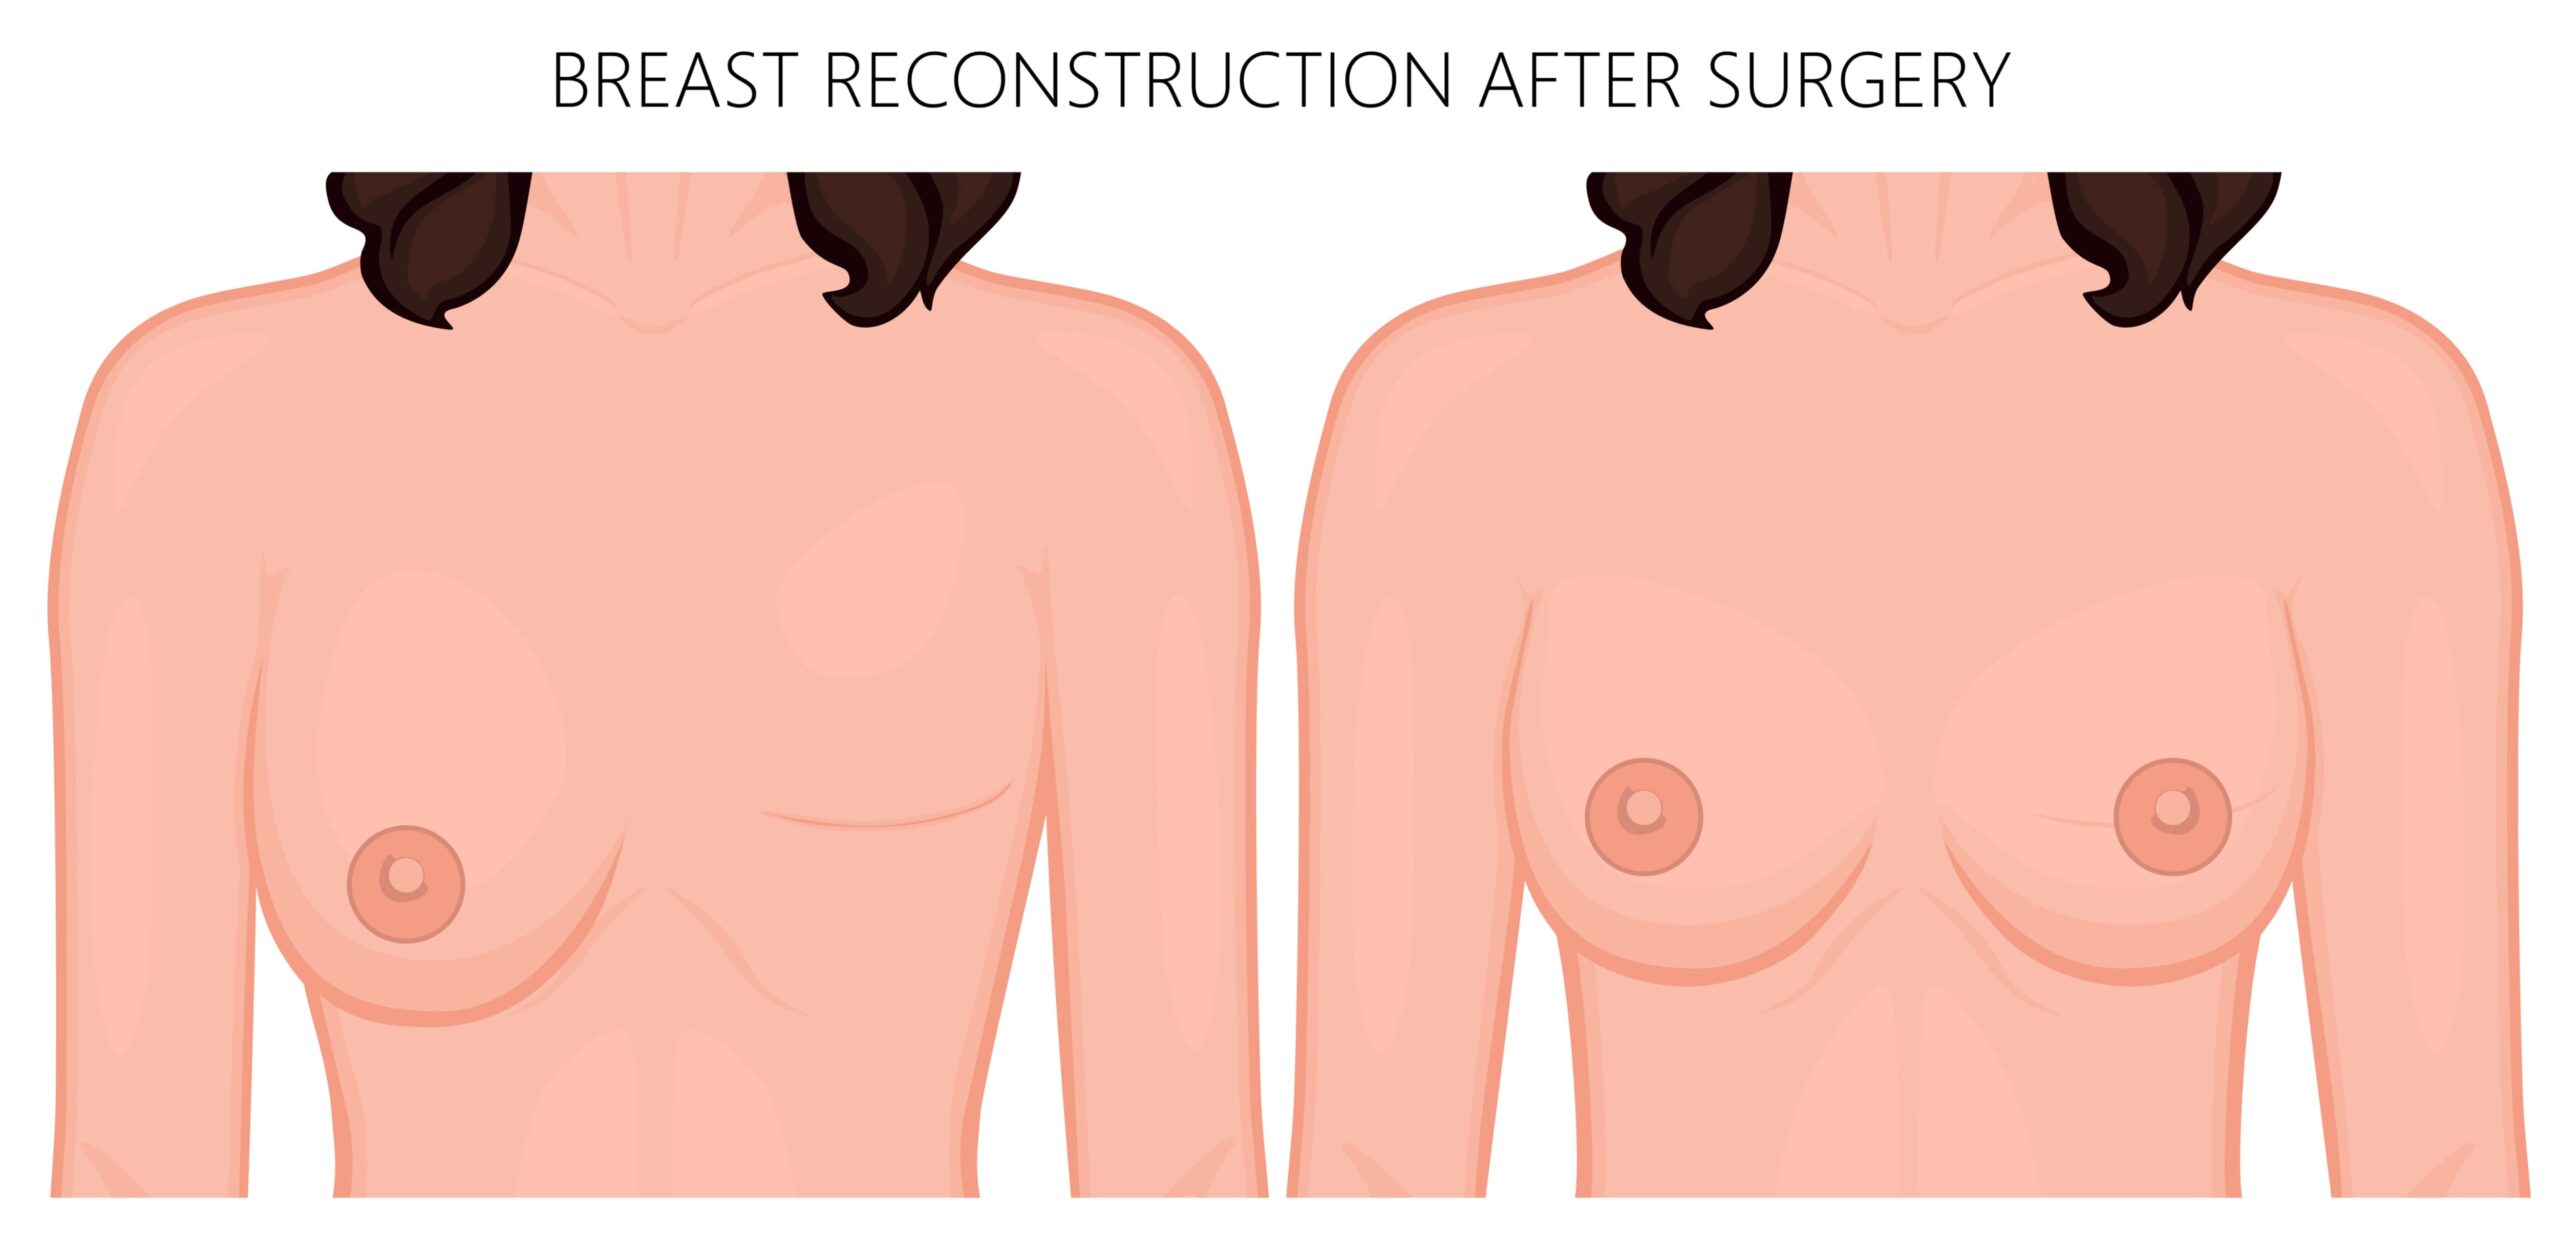 Illustration showing before and after breast reconstruction.